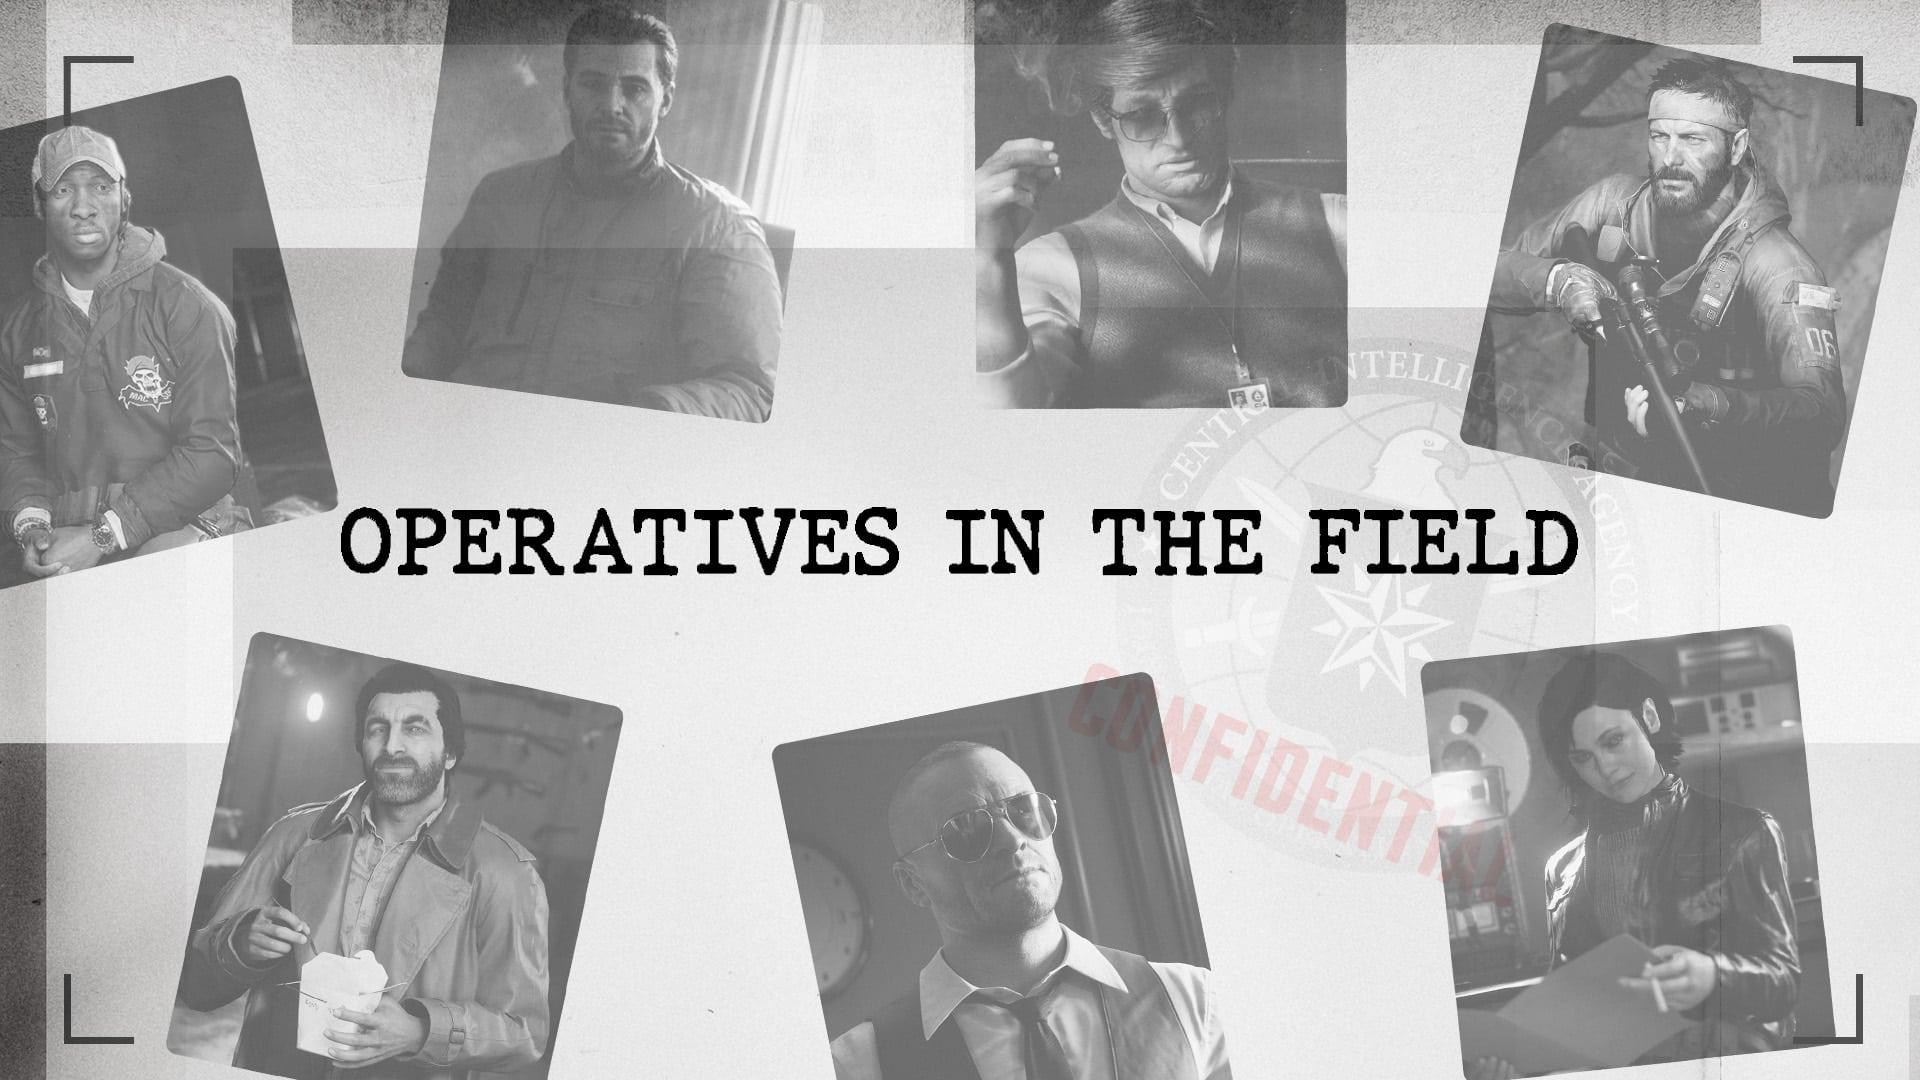 Meet the Operators of Call of Duty®: Black Ops Cold War